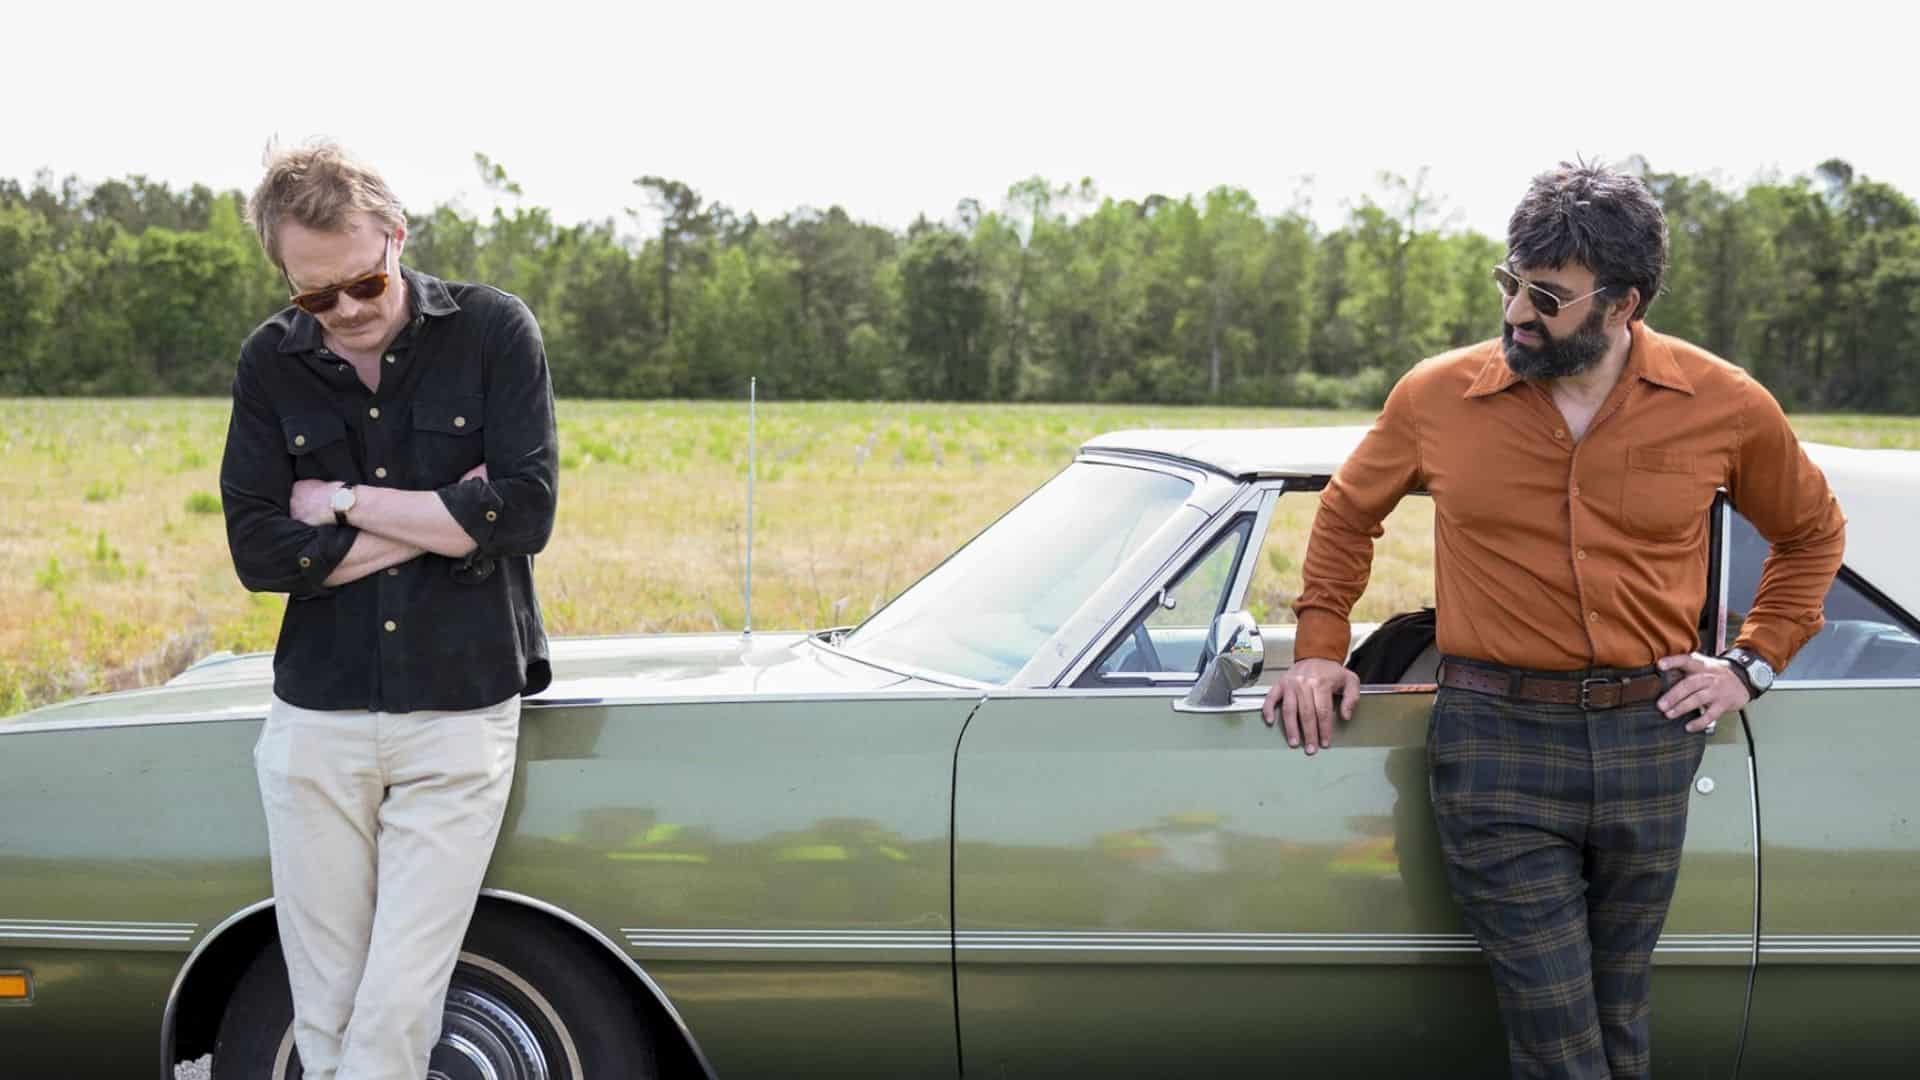 Two men lean on a green car in this image from Amazon Studios.